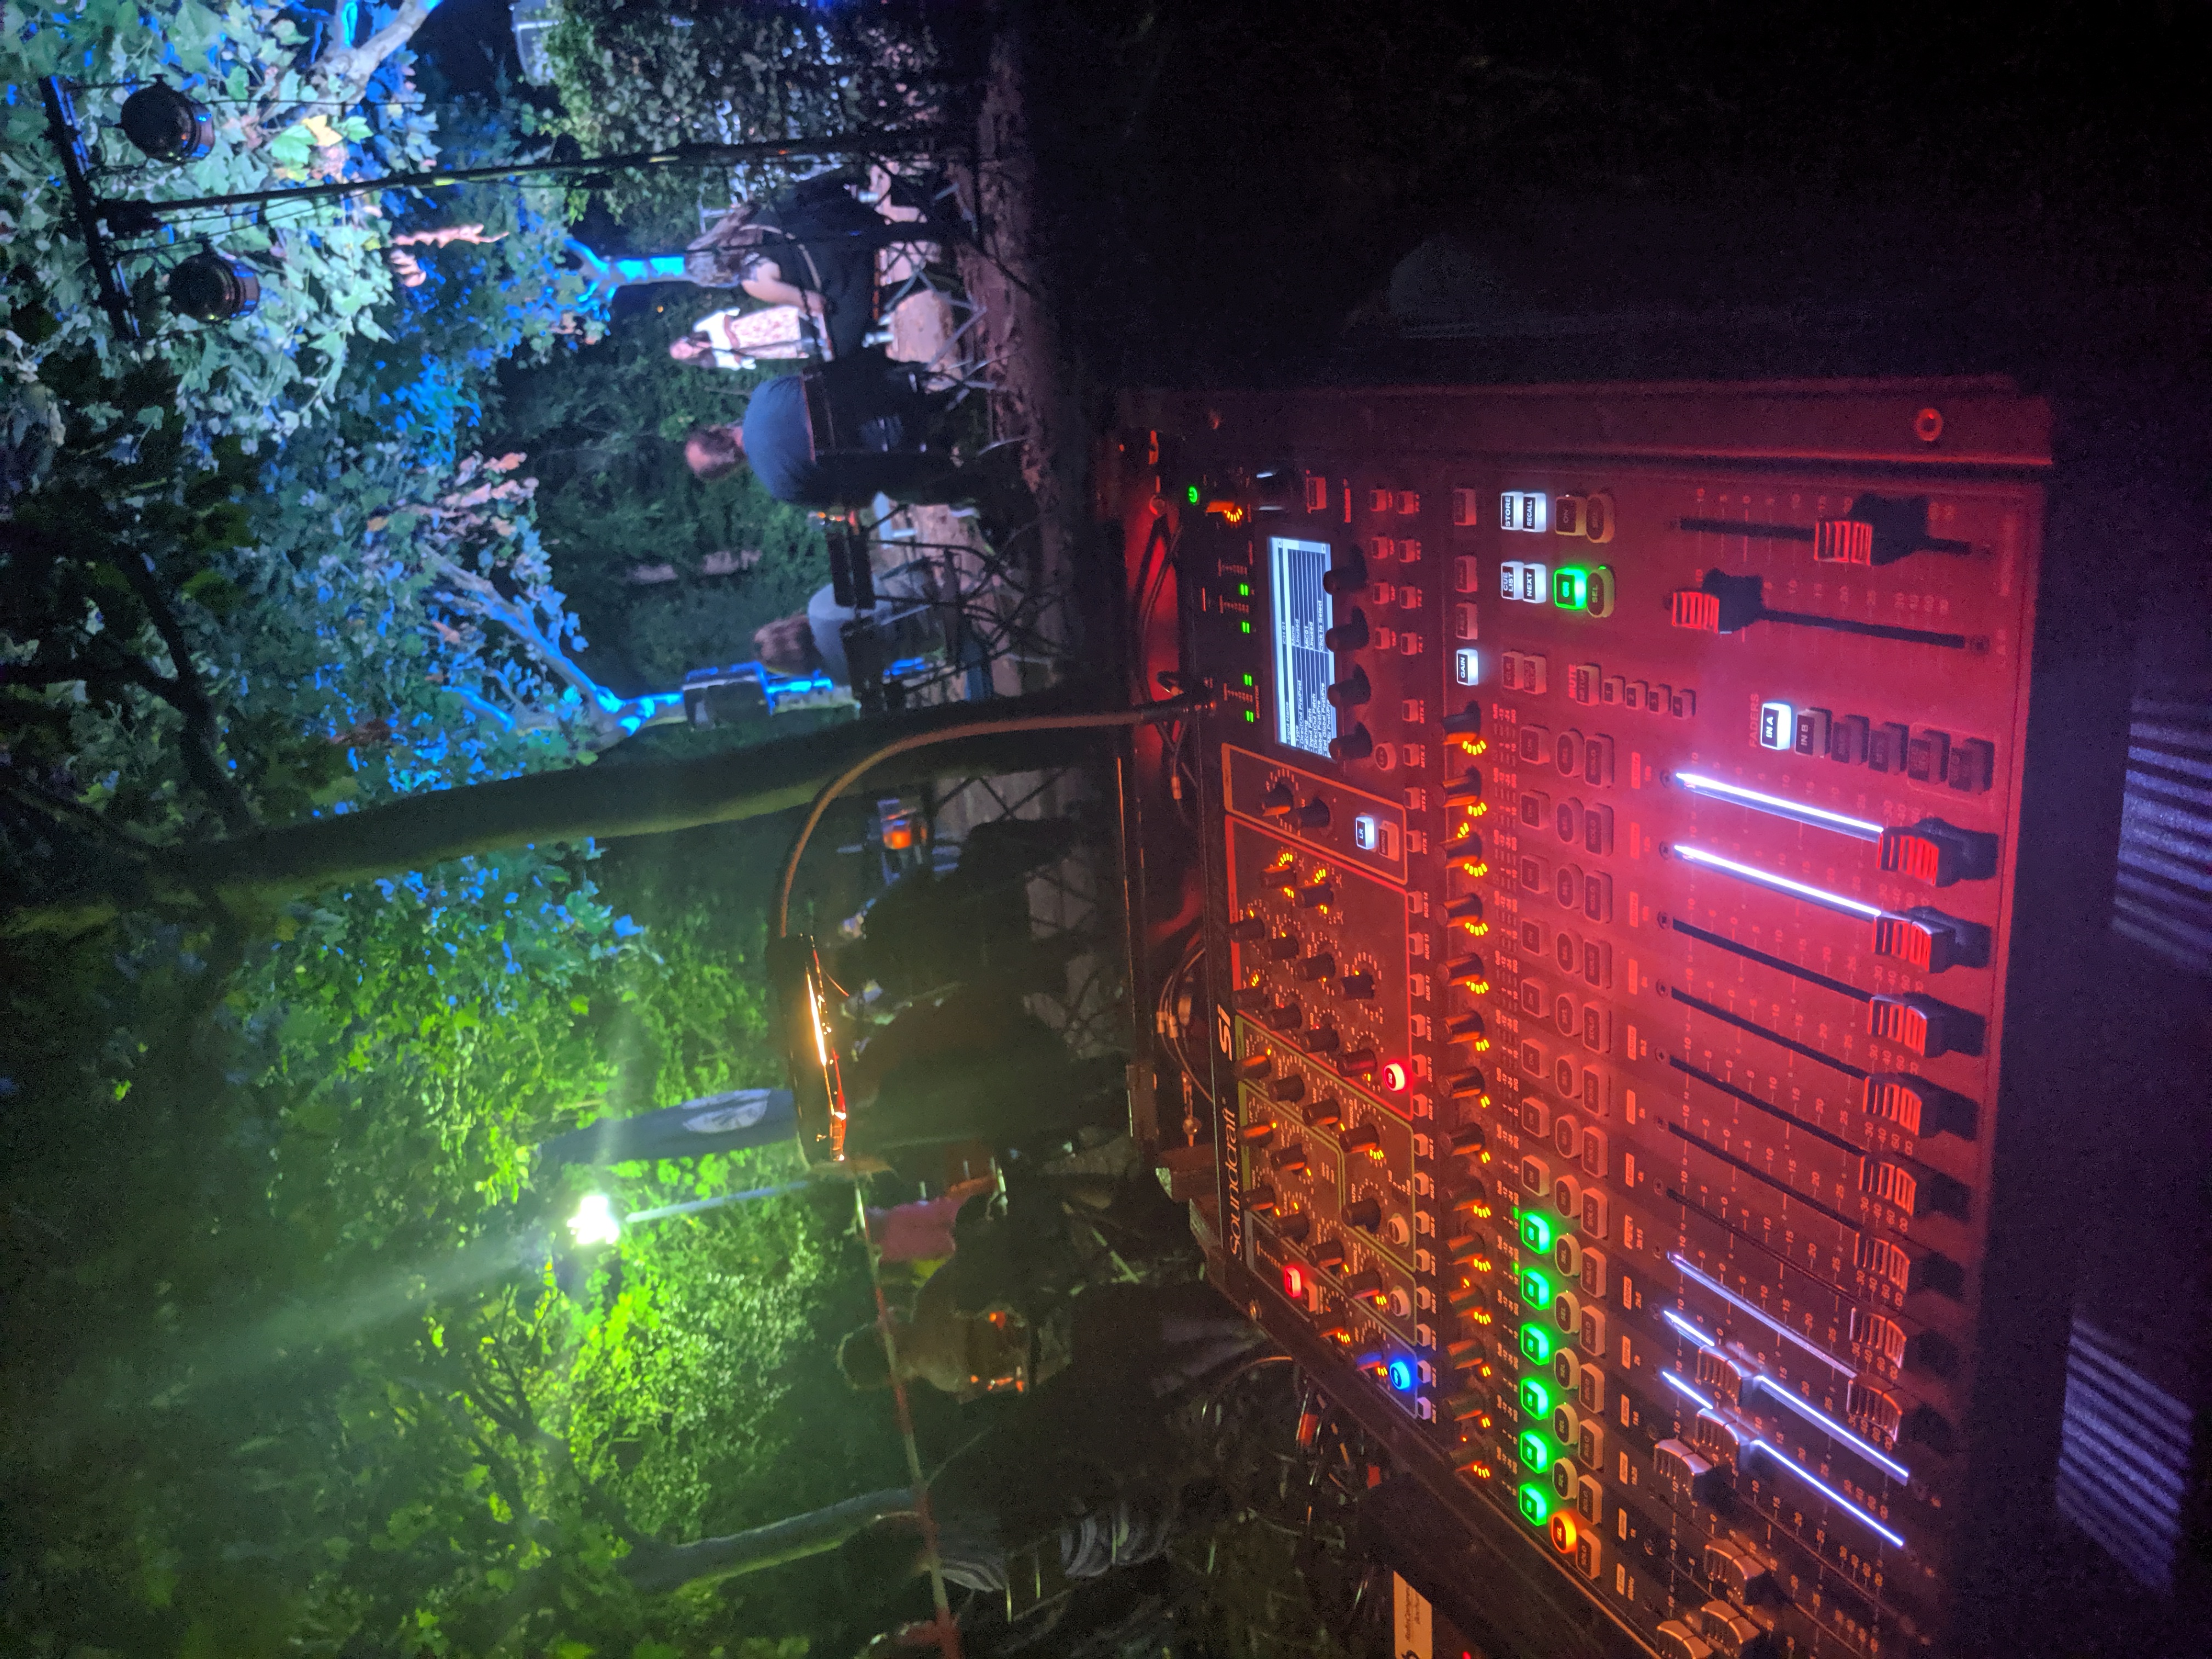 Colourfully lit mixing desk at the Freilichtbühne Wattenscheid. Trees can be seen in the background.